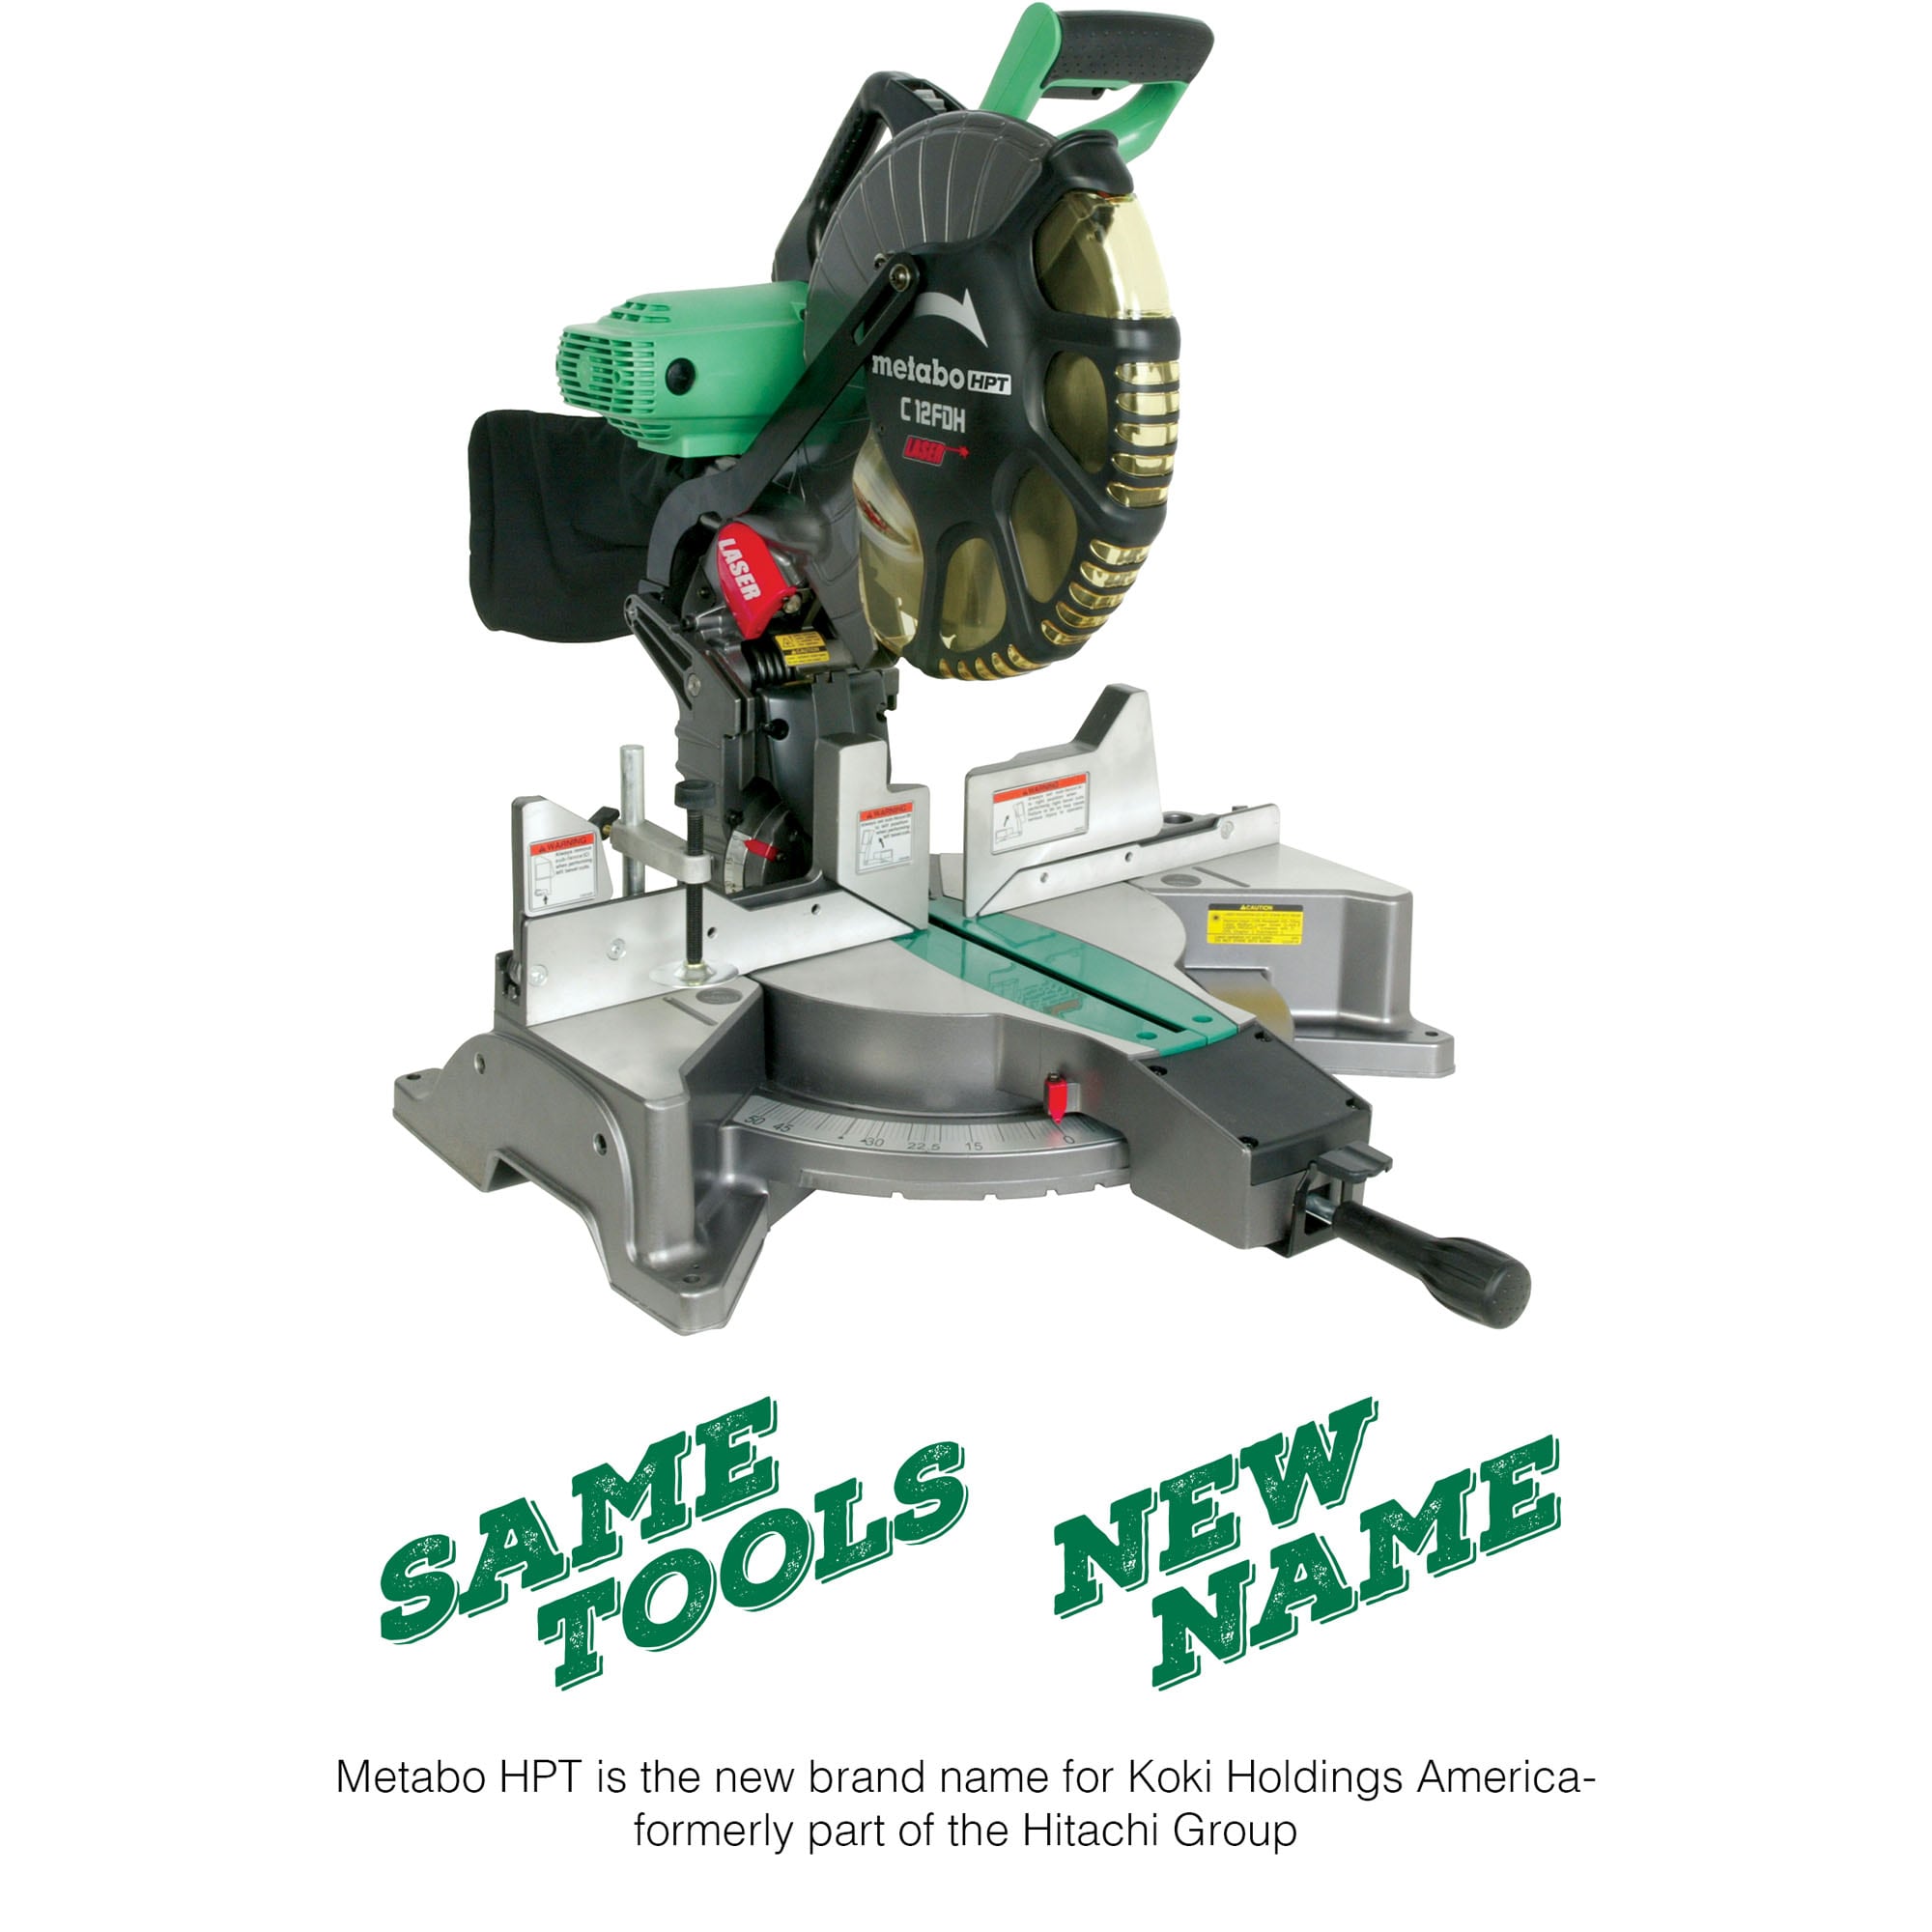 Metabo HPT C12FDHSM 12-in 15 Amps Dual Bevel Compound Corded Miter Saw